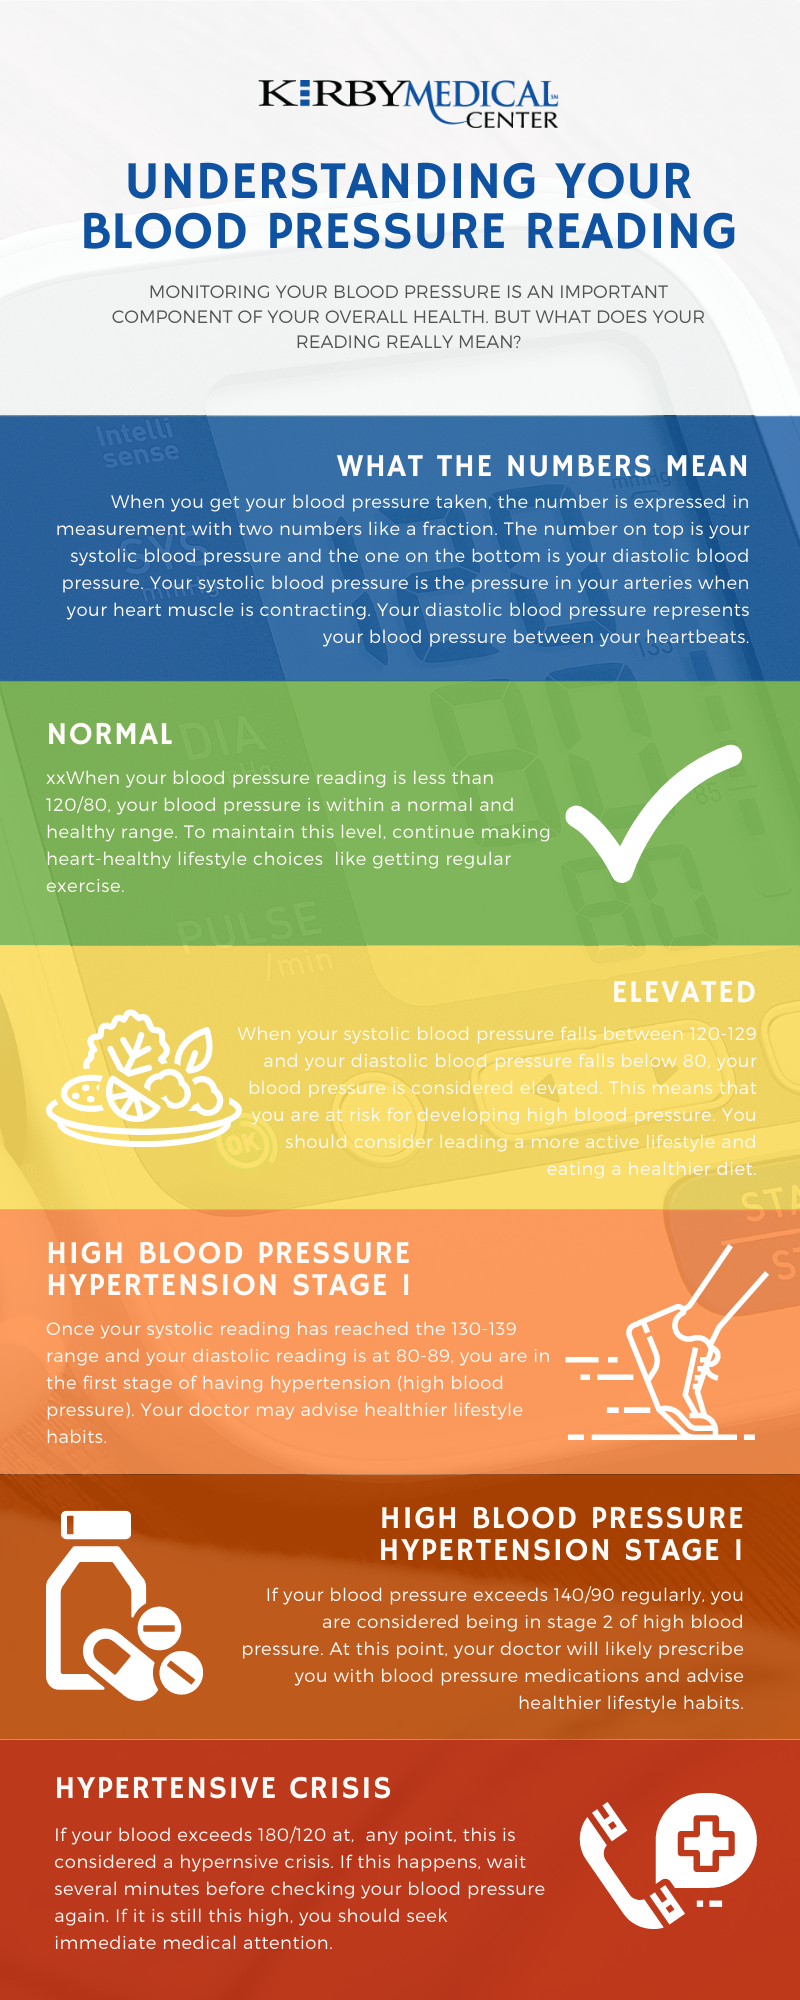 understanding-your-blood-pressure-reading-kirby-medical-center